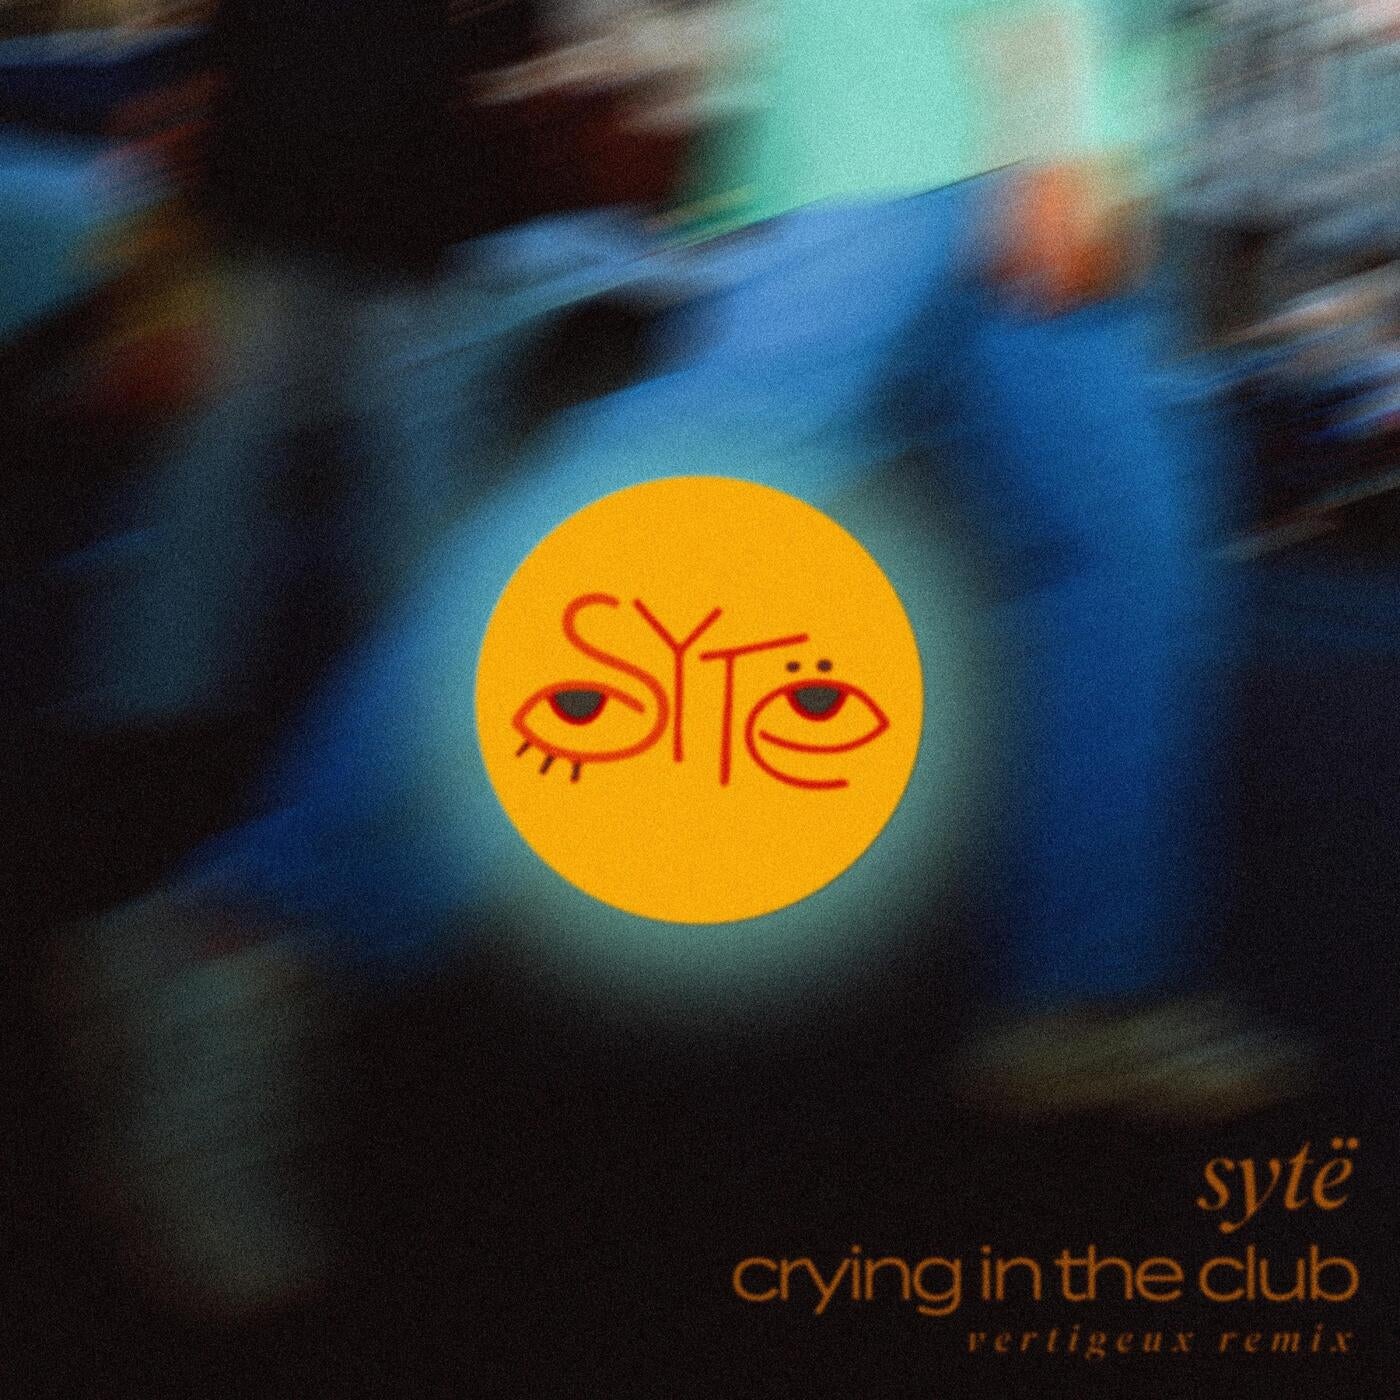 Crying in the Club (Vertigeux Remix) from DistroKid on Beatport